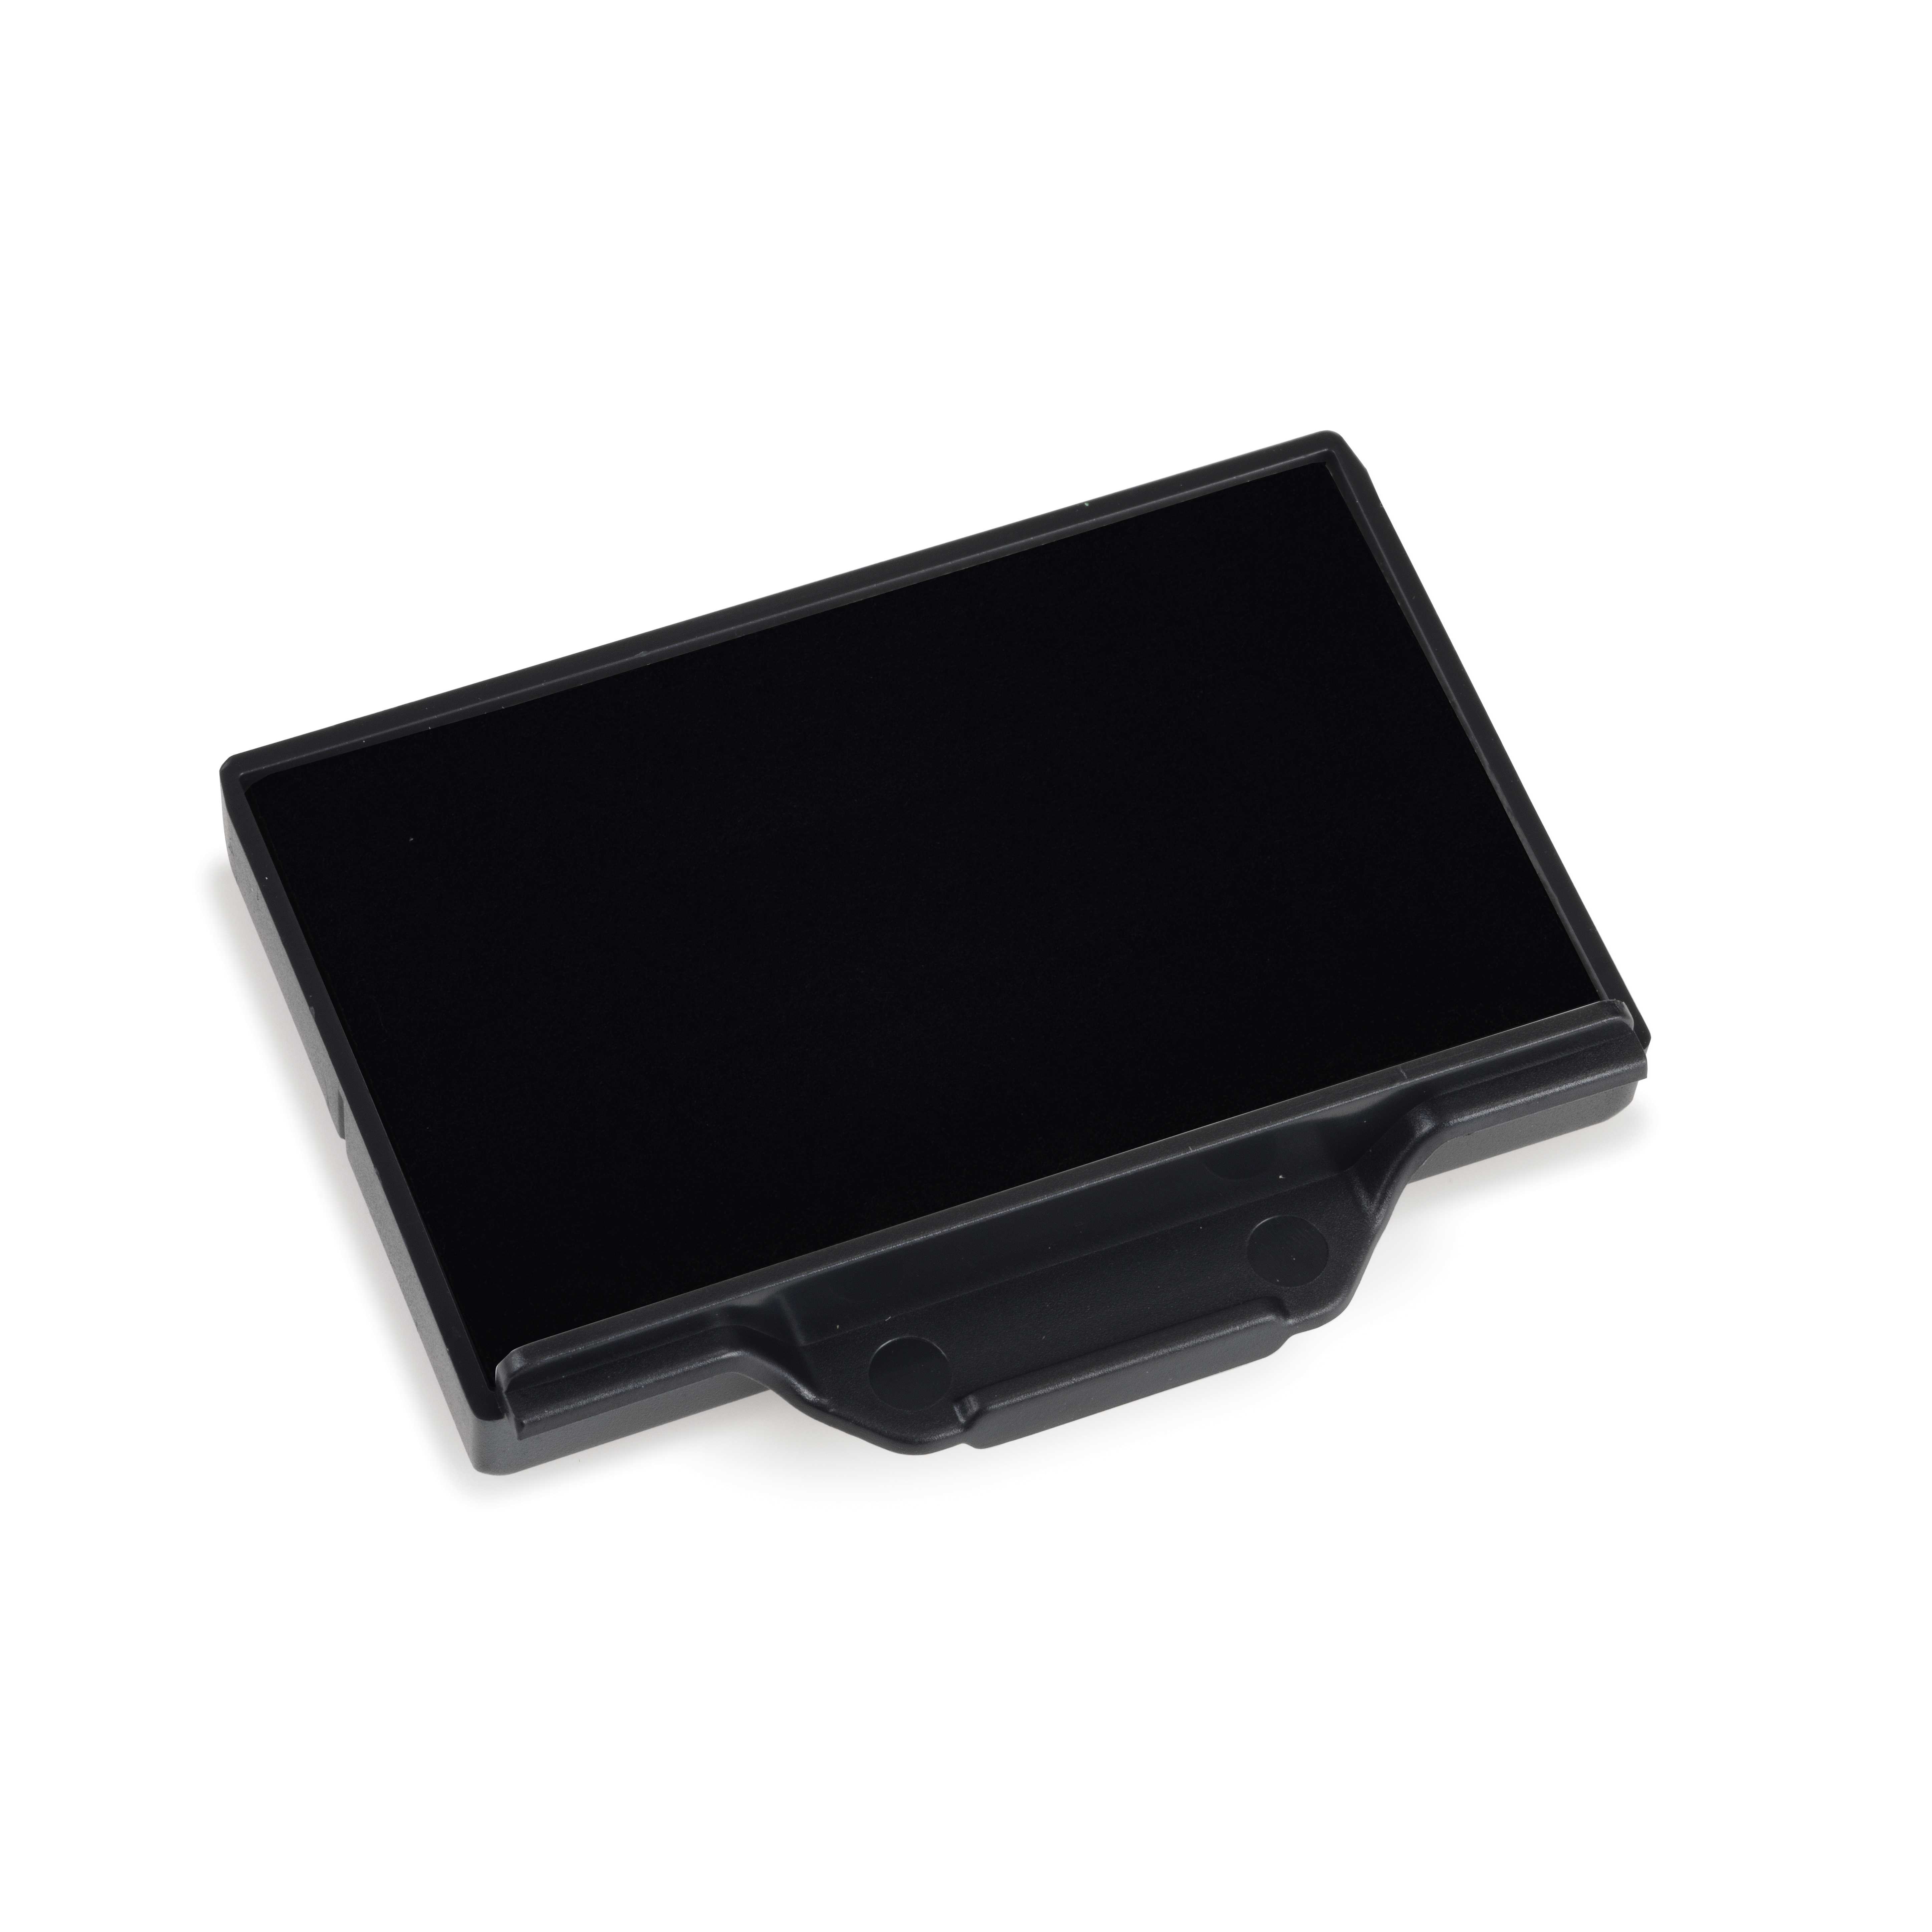 Replacement Pad for Trodat 5206 Self Inking Stamp - Black Ink Color